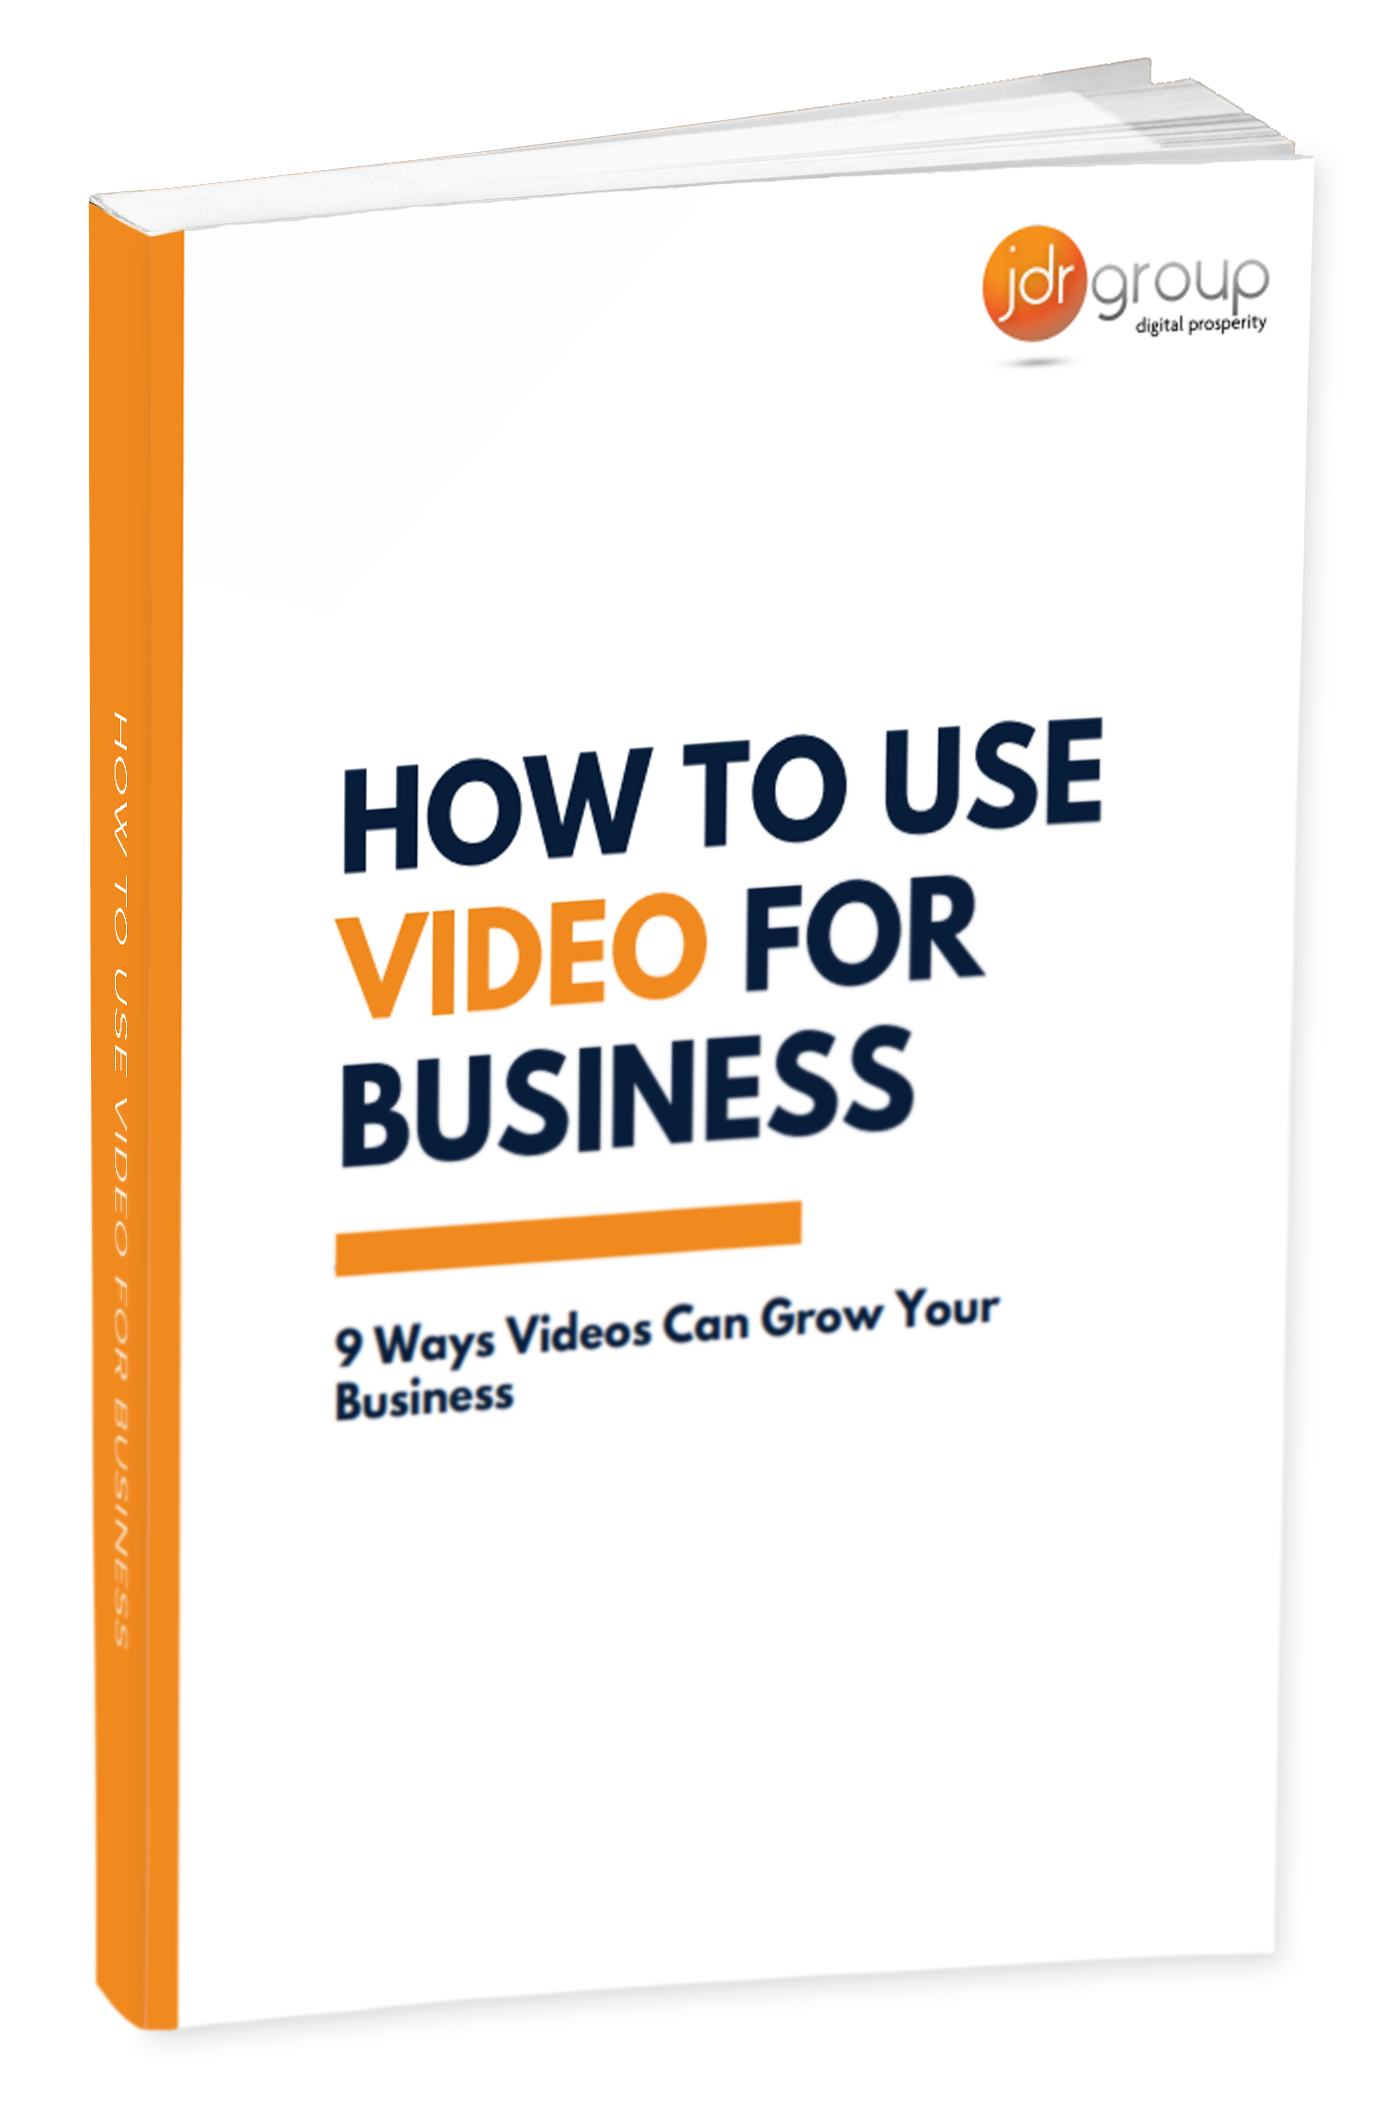 JDR_-how-to-use-video-for-business